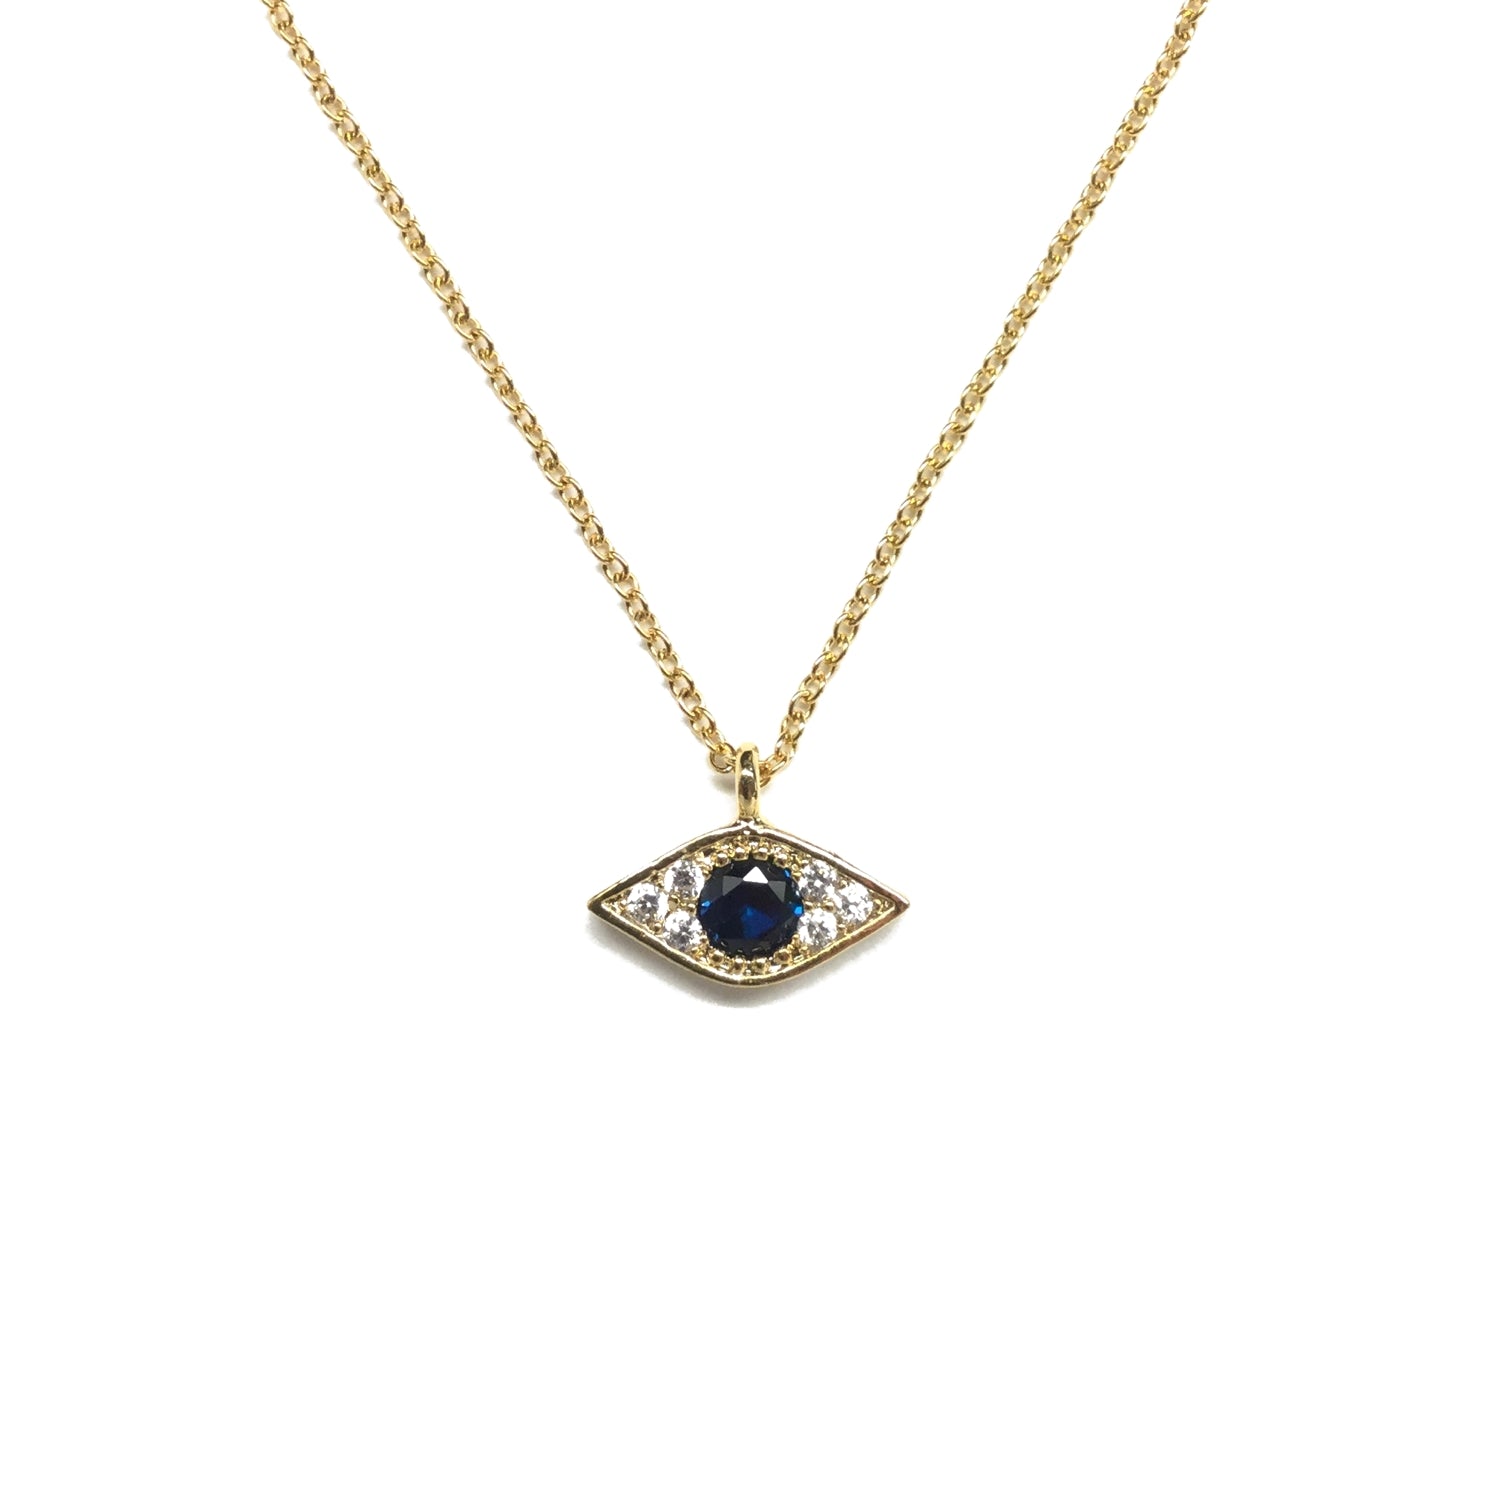 Gold plated evil eye white cubic zirconia with a larger faceted blue cubic zirconia necklace